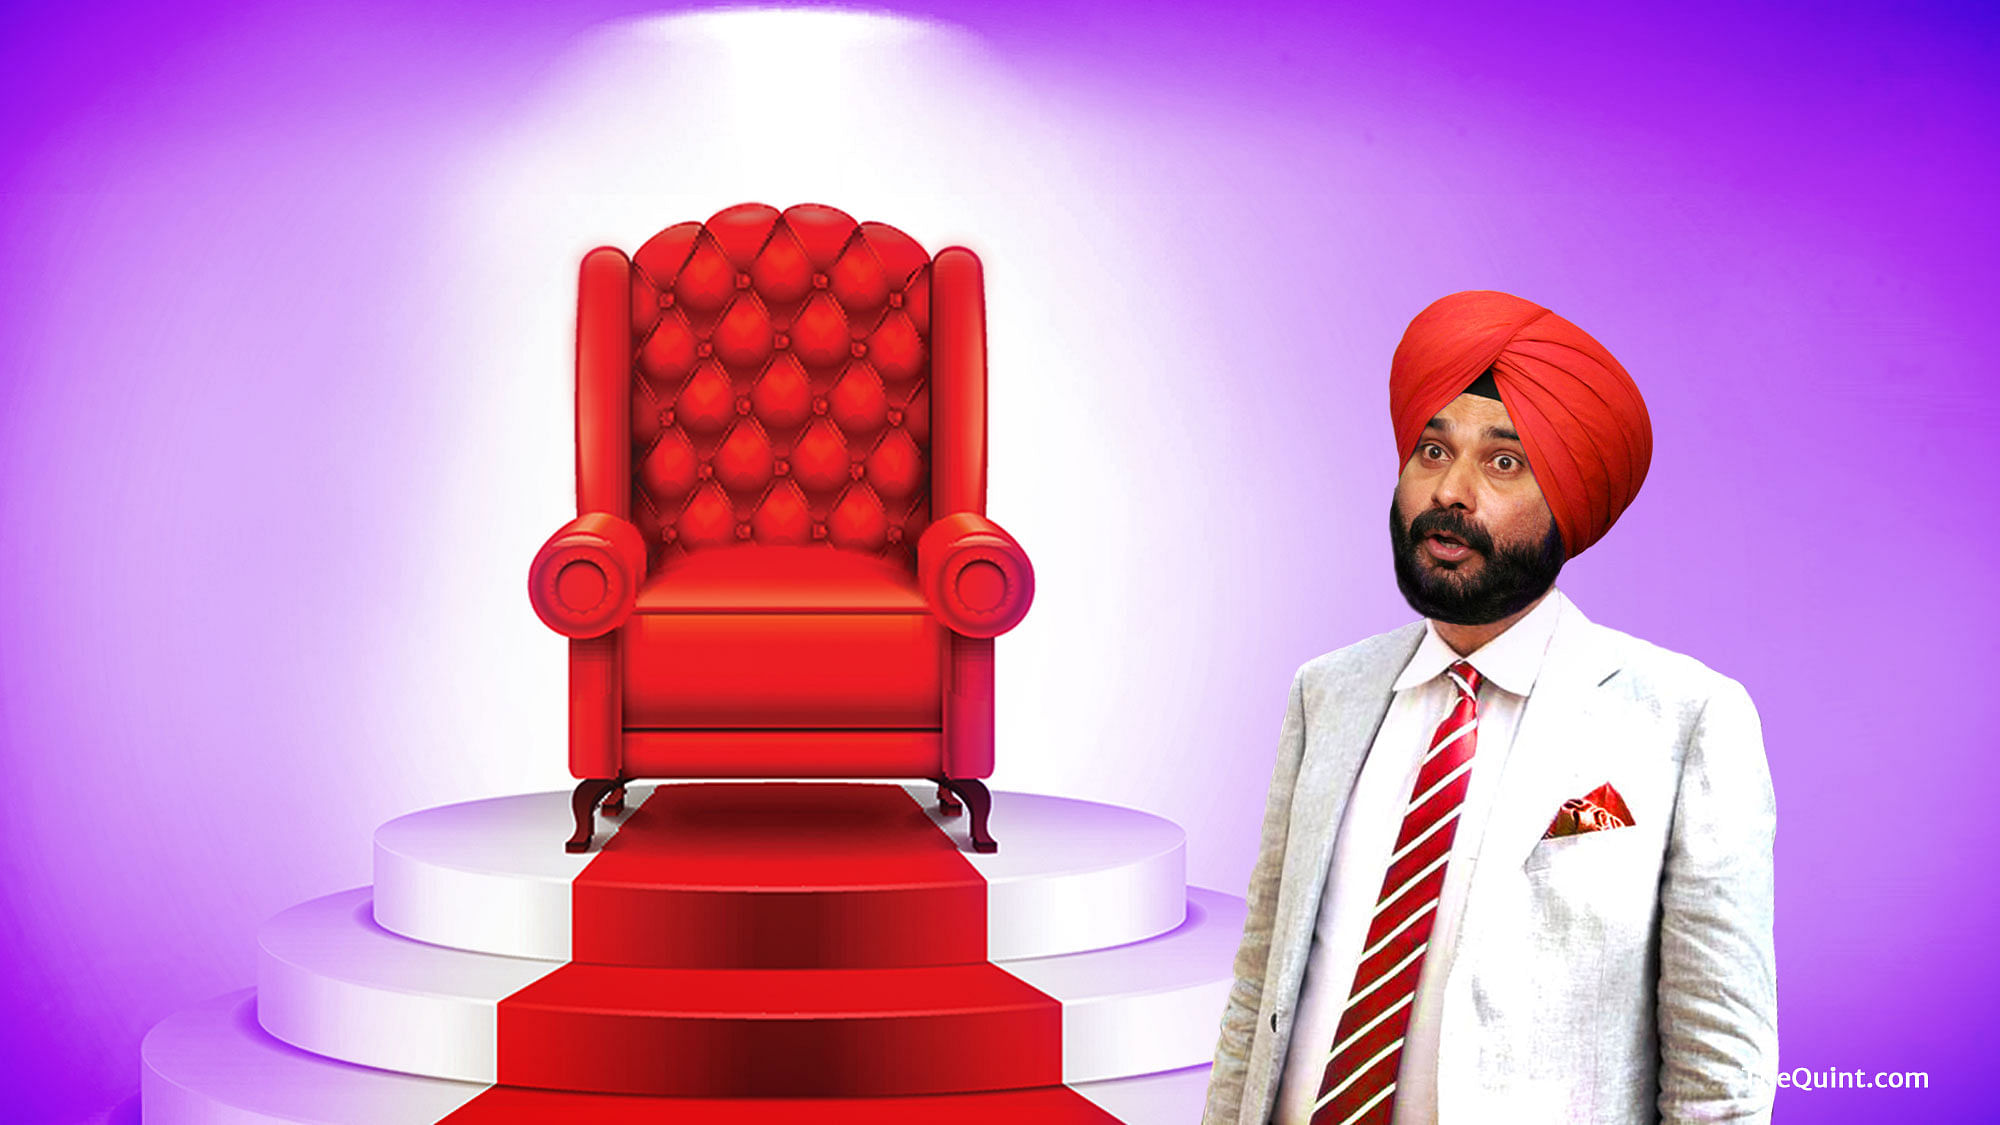 

For now, Congress may have pacified Sidhu with a ministerial berth, will that be enough to prevent internal strife? (Photo: Lijumol Joseph/<b> The Quint</b>)